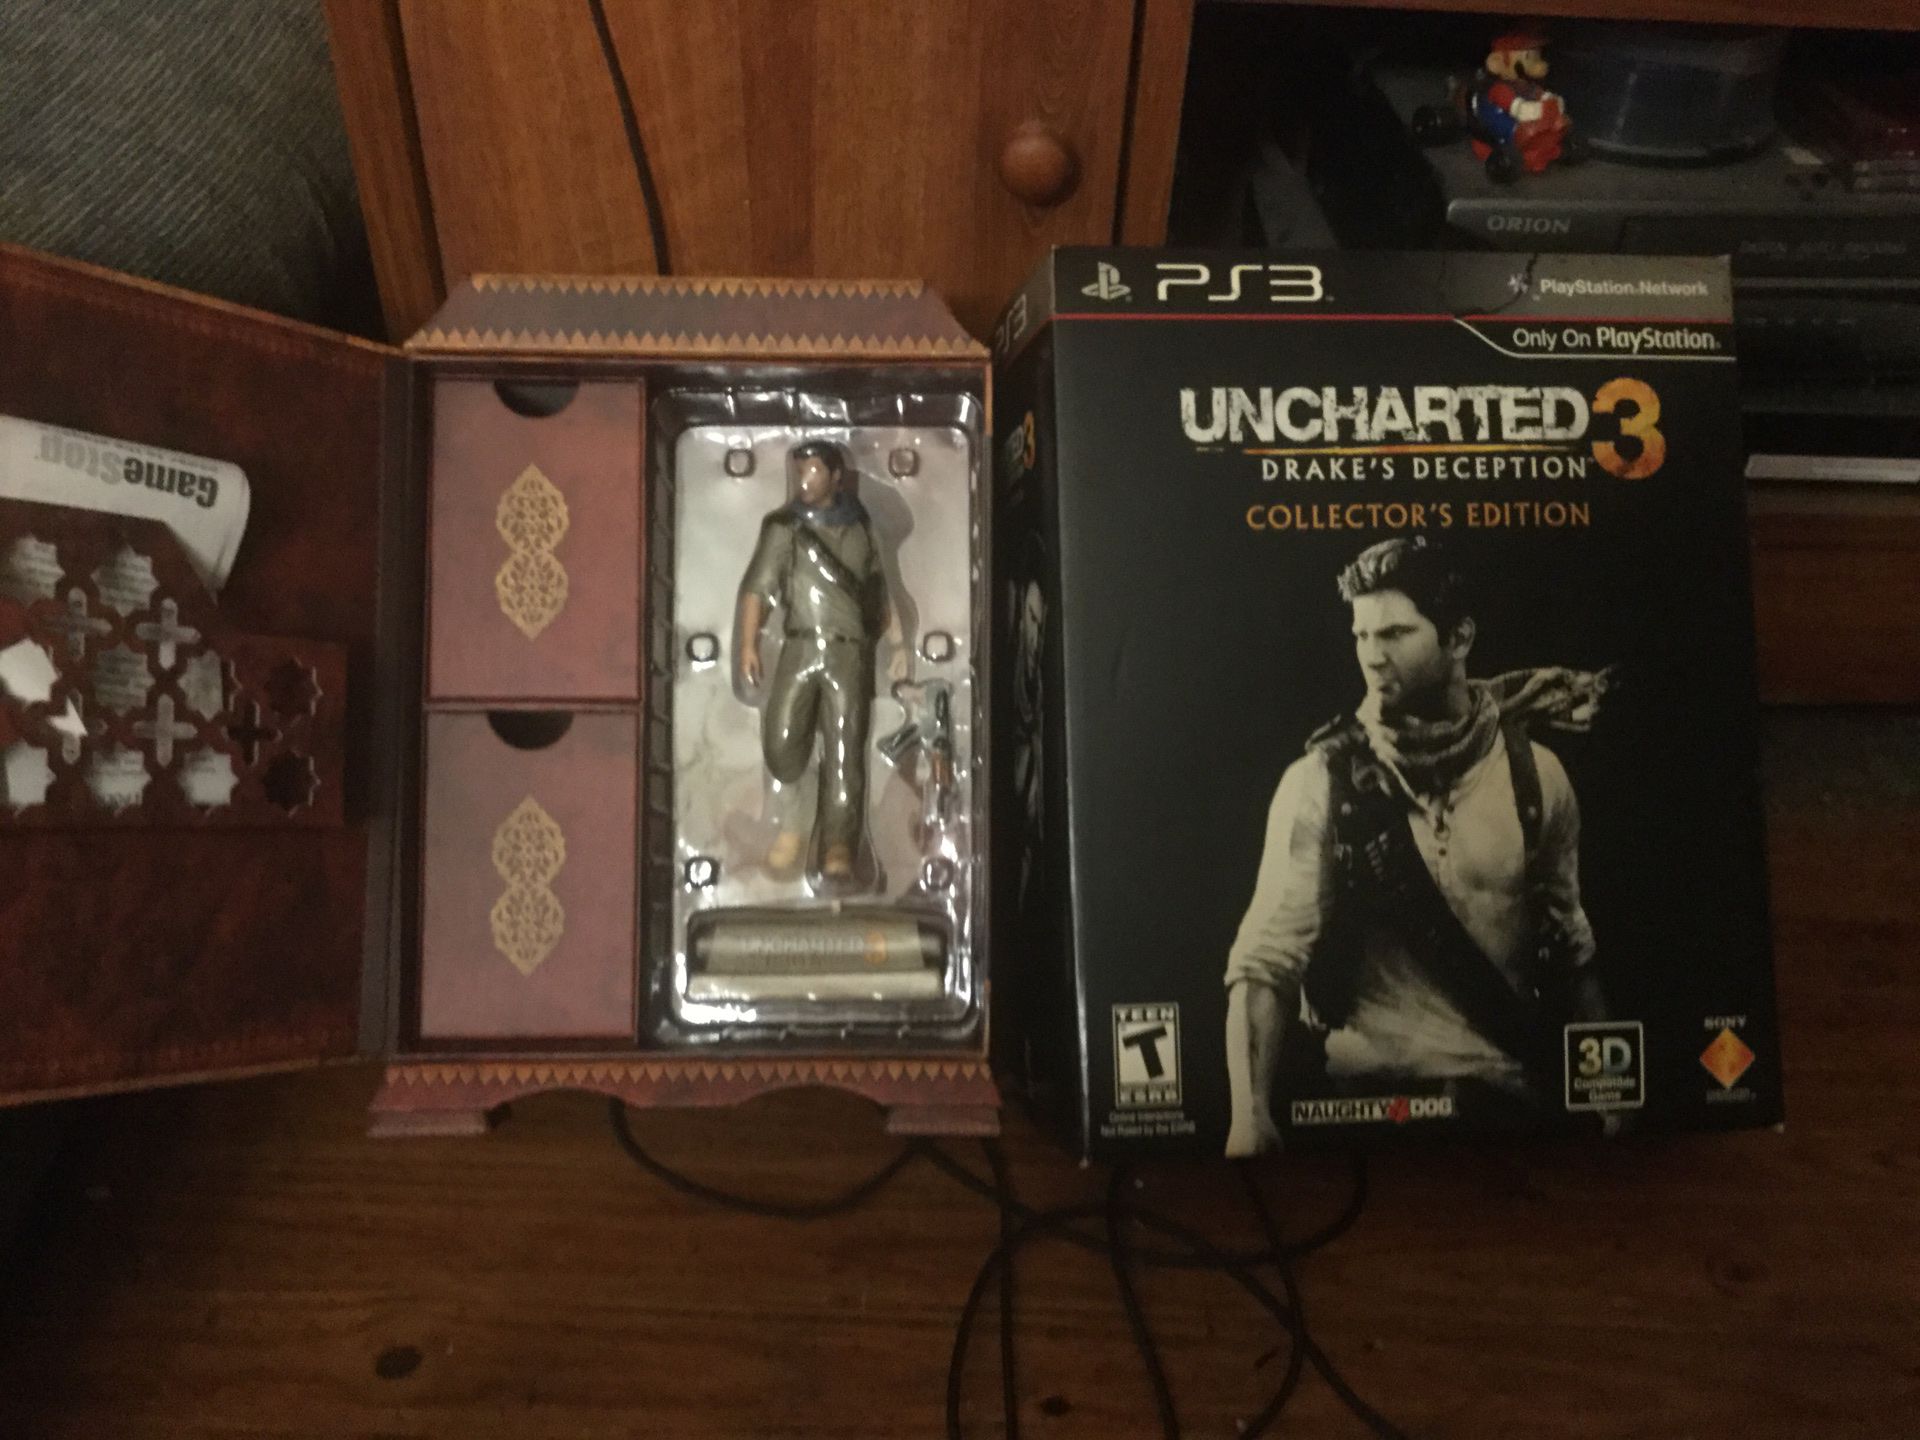 Uncharted 3 collectors edition ps3